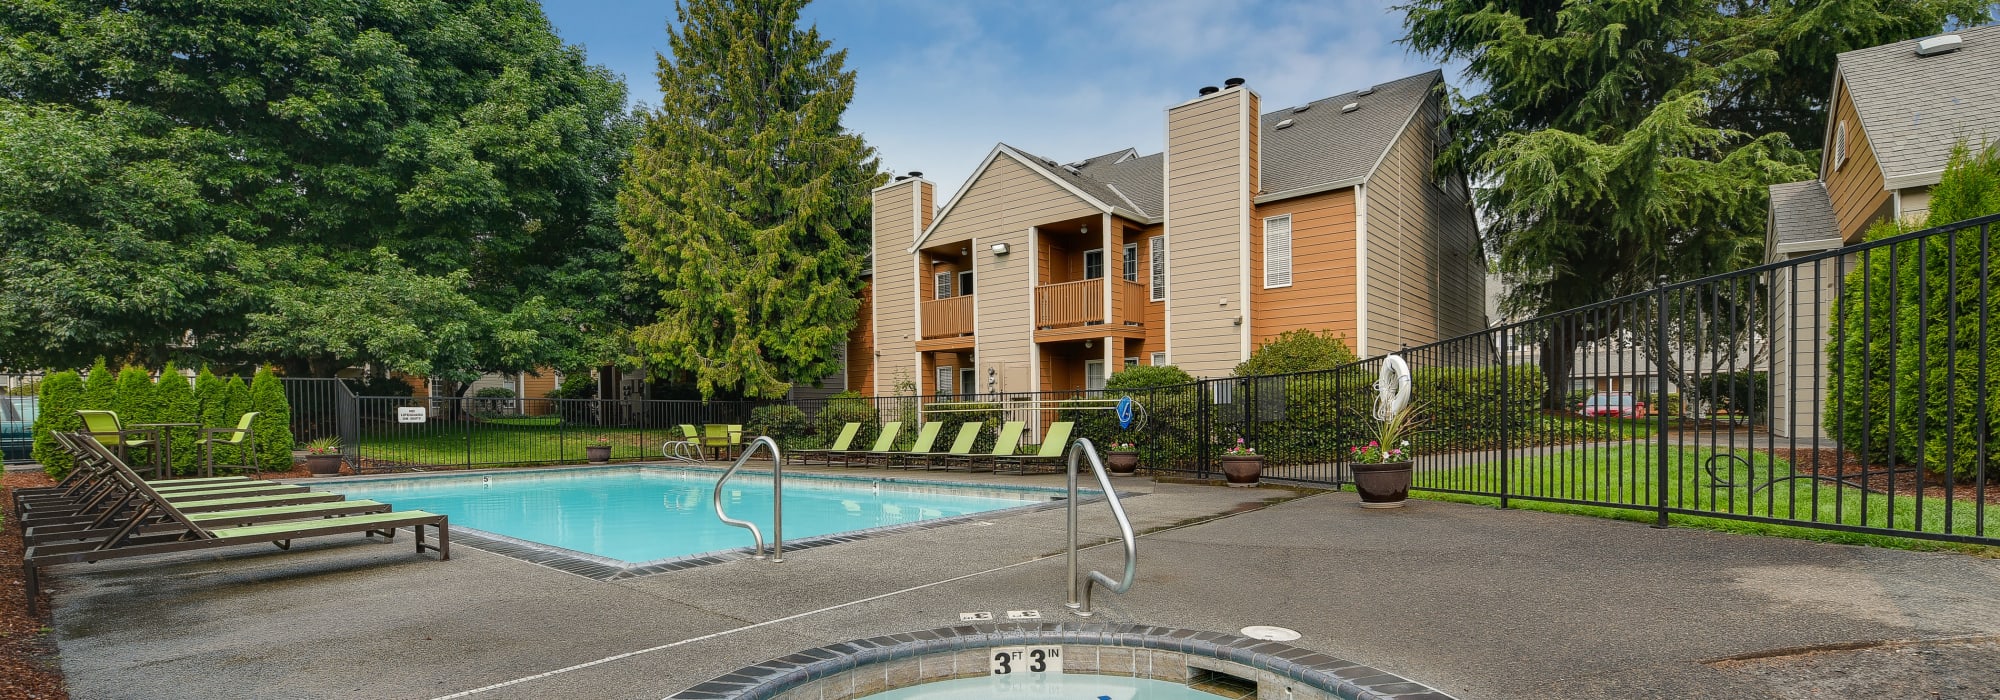 Amenities at Carriage House Apartments in Vancouver, Washington